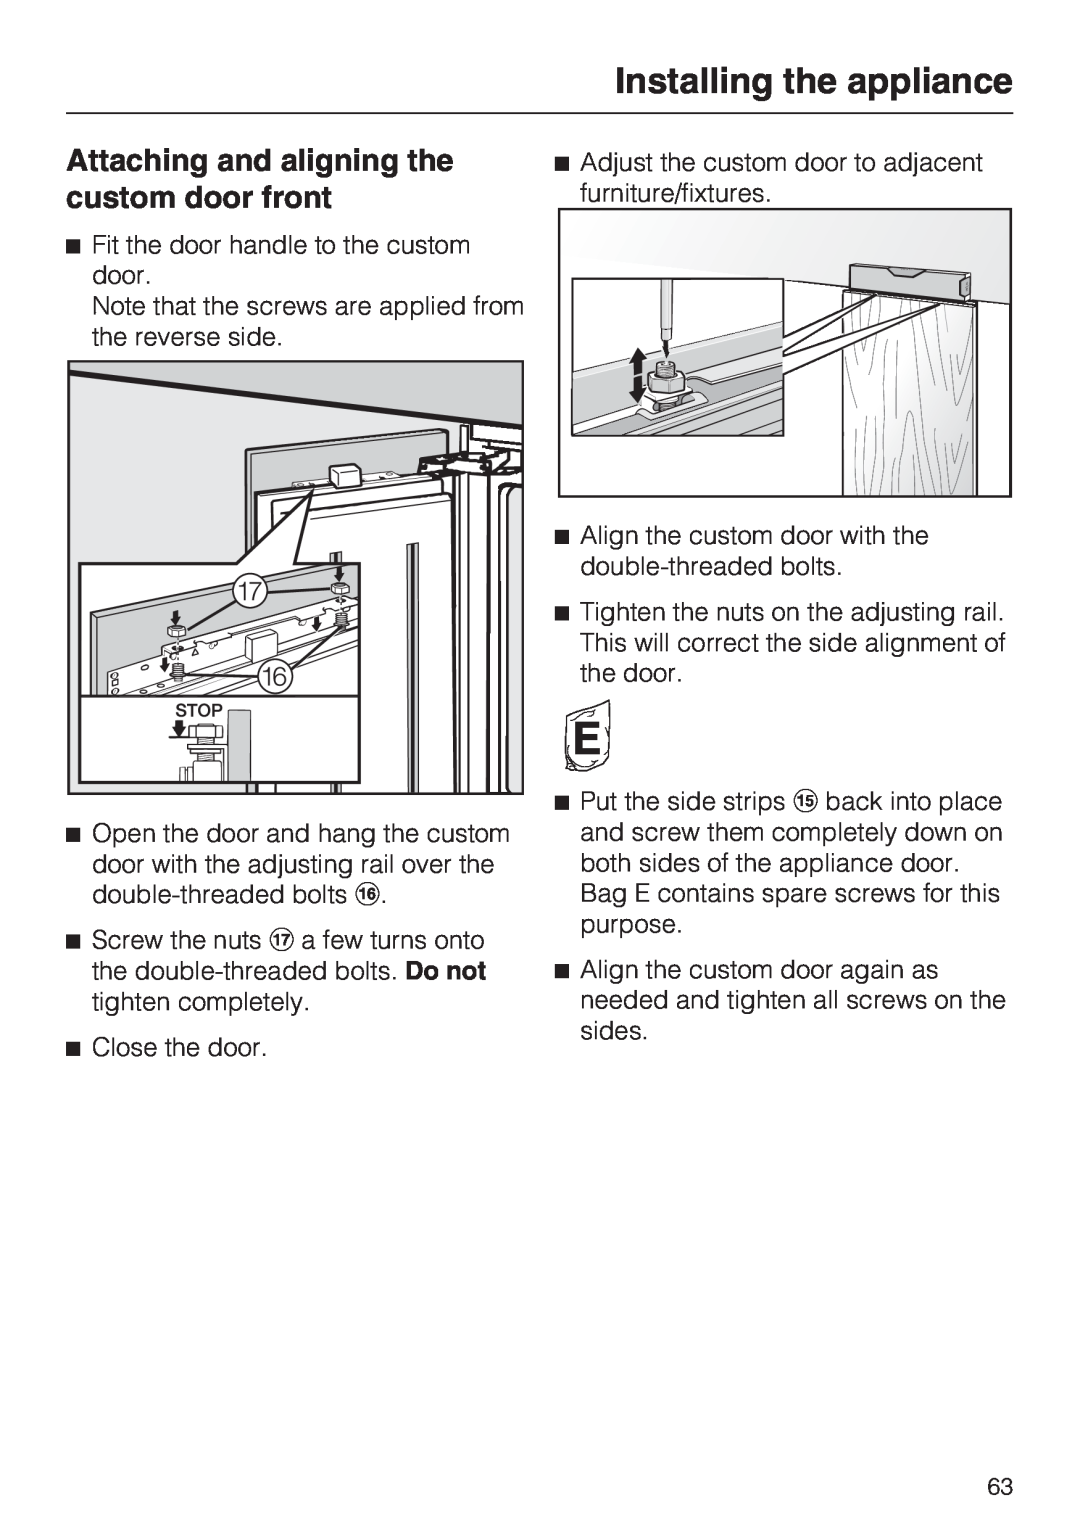 Miele F1411VI installation instructions Attaching and aligning the custom door front, Installing the appliance 